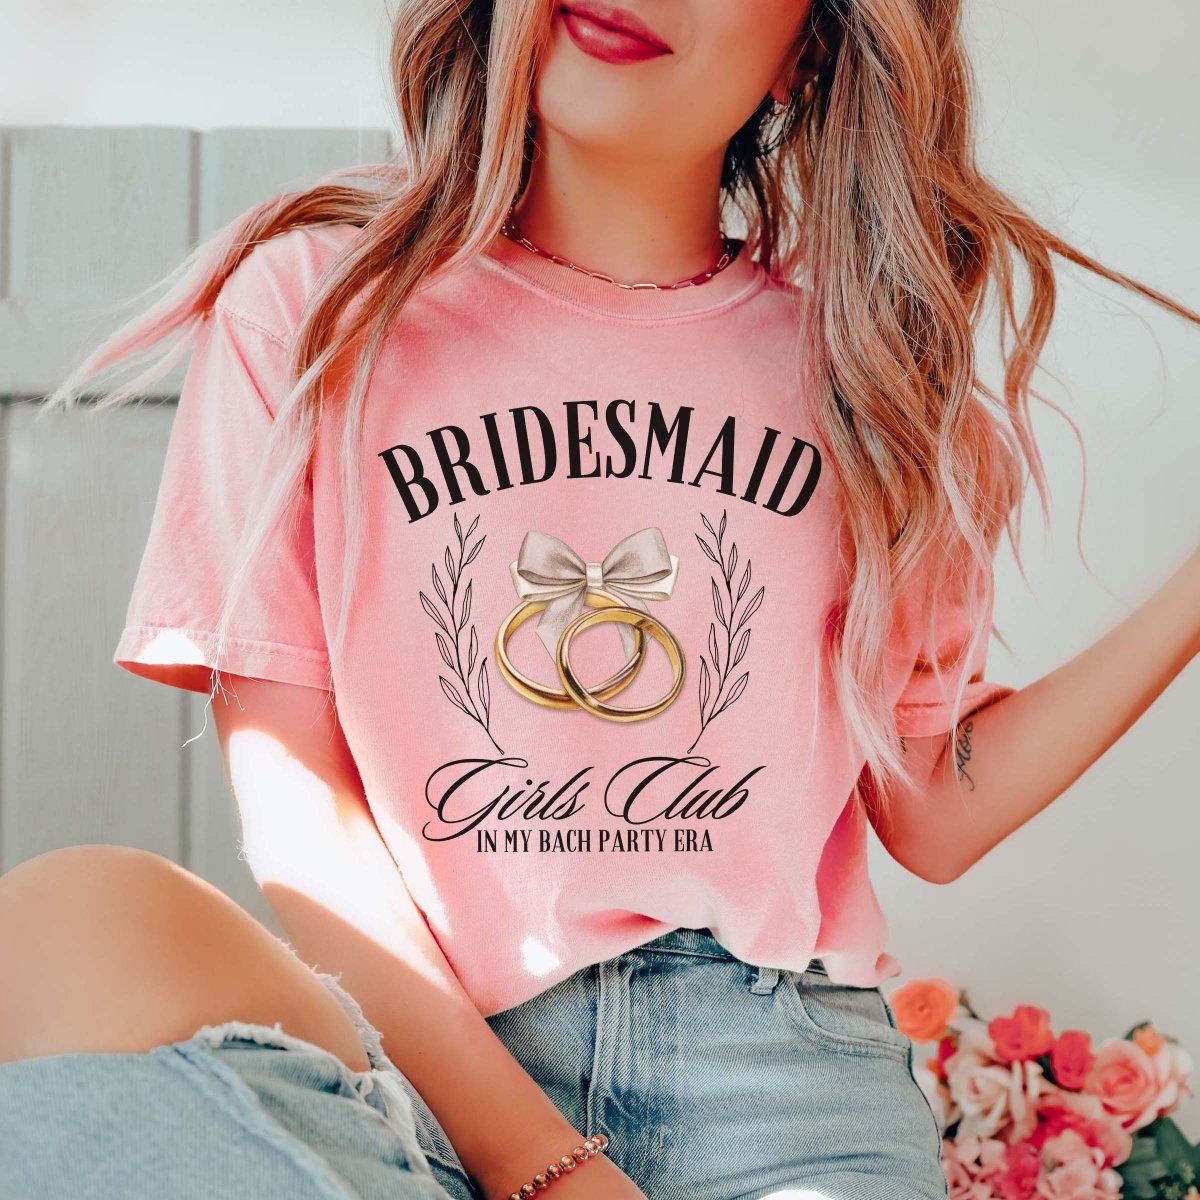 Bridal Party Girls Club Tees - Limeberry Designs